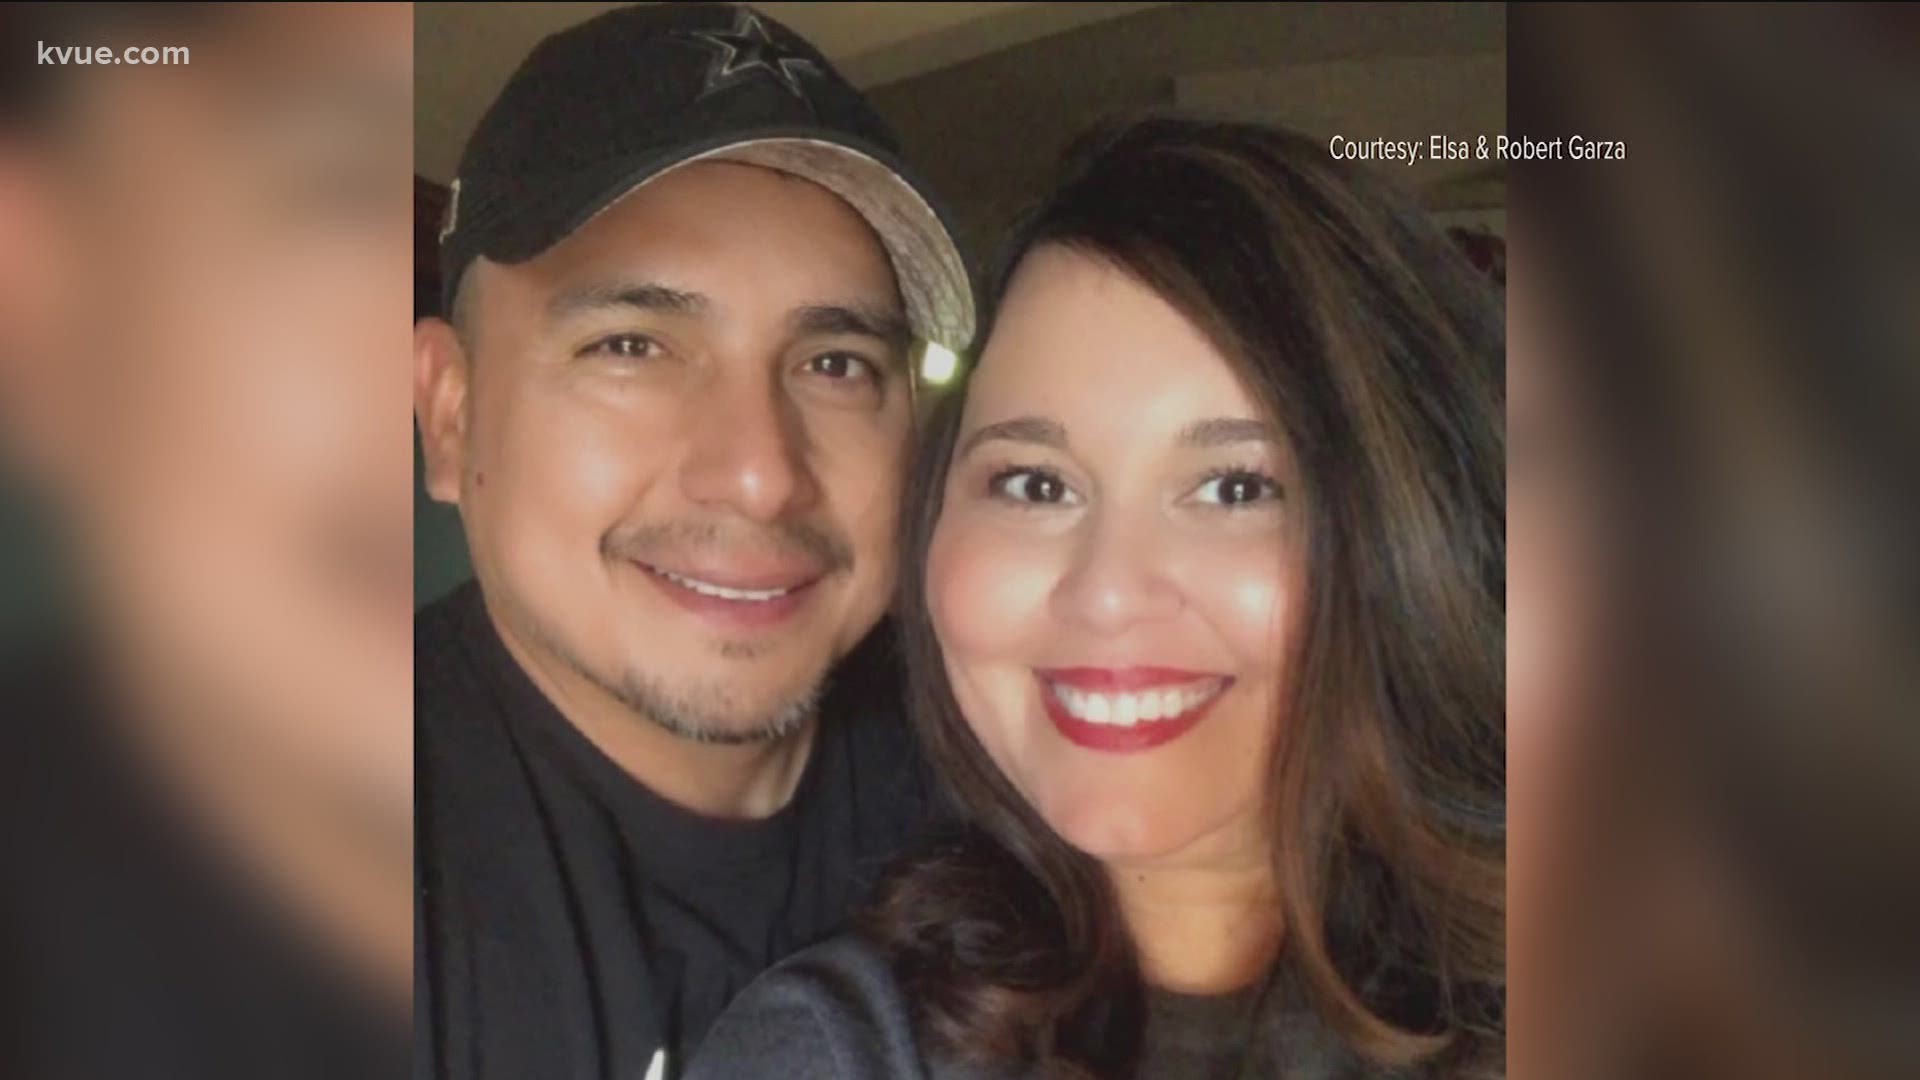 After experiencing weeks of delays because of the coronavirus, an Austin couple is getting ready for surgery. The two will go through a kidney transplant on May 21.